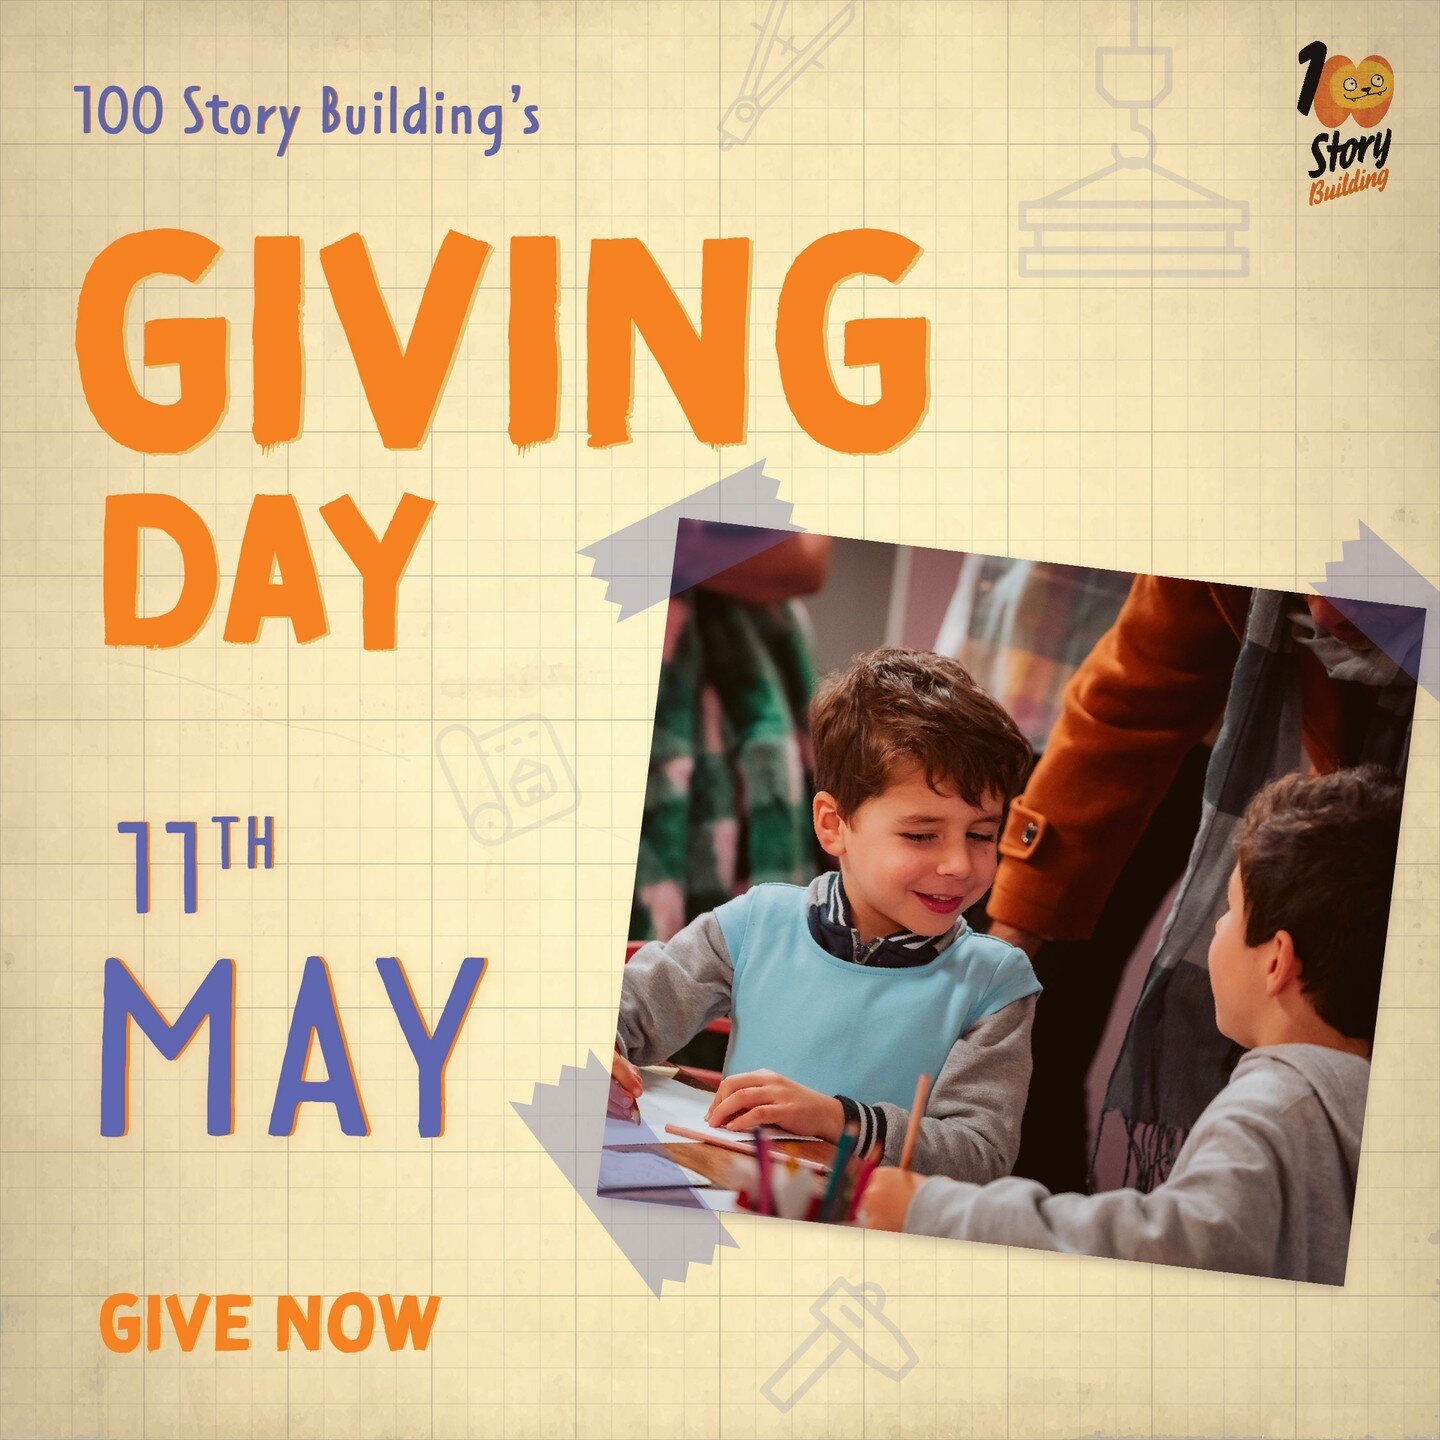 The more money we raise today on our #100SBGivingDay the bigger our impact can be. Not only does support today open the doors of our new building, it also means more free programs for low income schools, subsidised programs so more children have acce